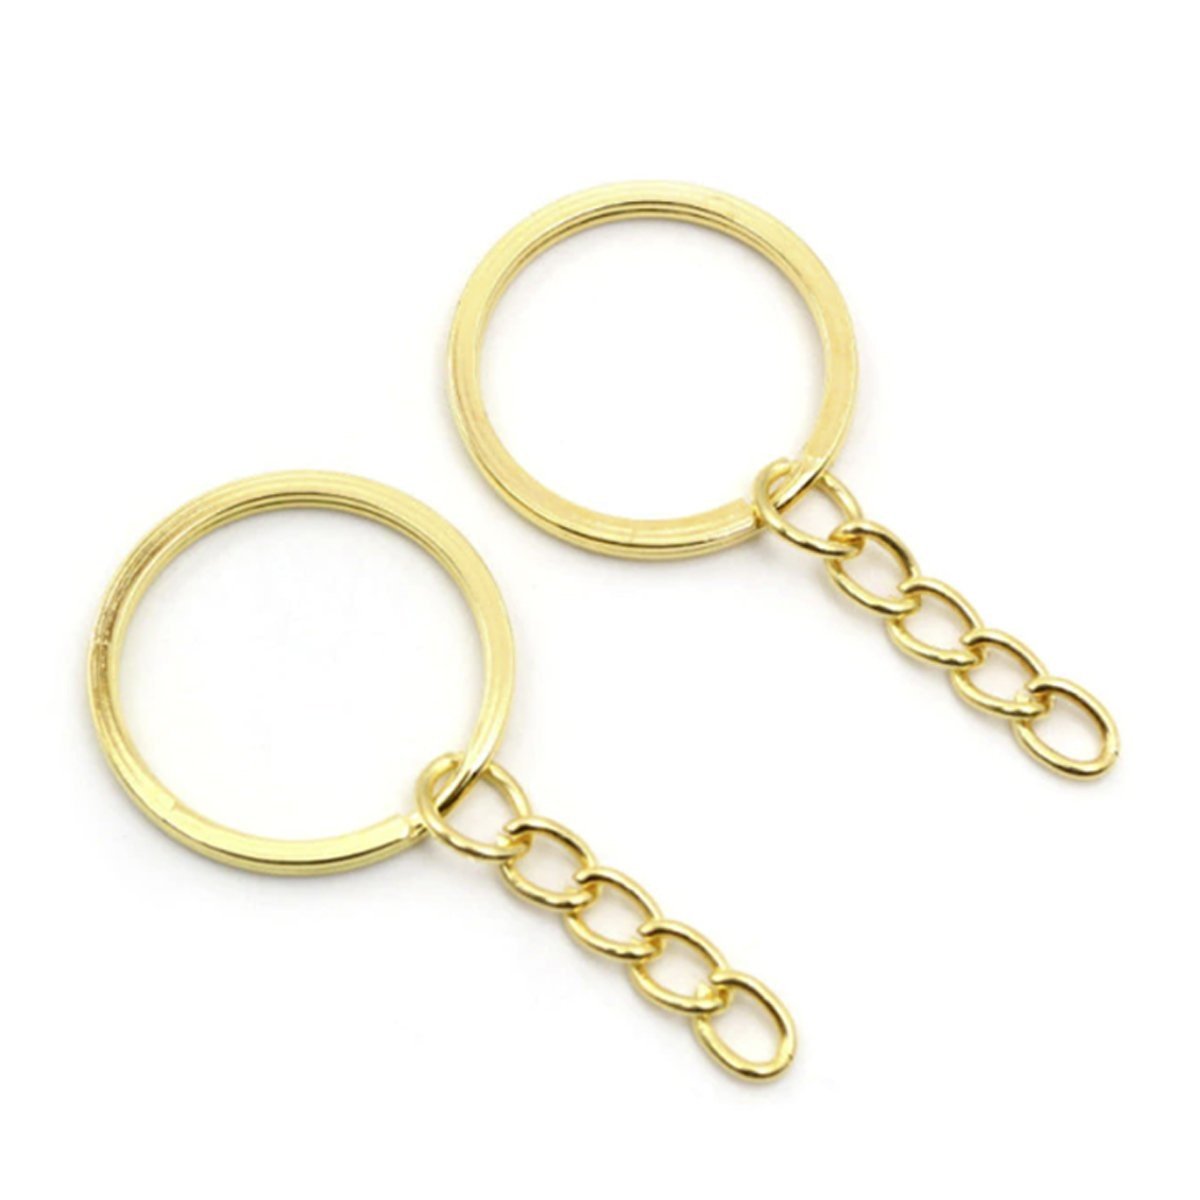 20pcs 25mm Rose Gold Ancient Keyring Keychain Split Ring Chain Key Rings Key Chains - Gold - - Asia Sell